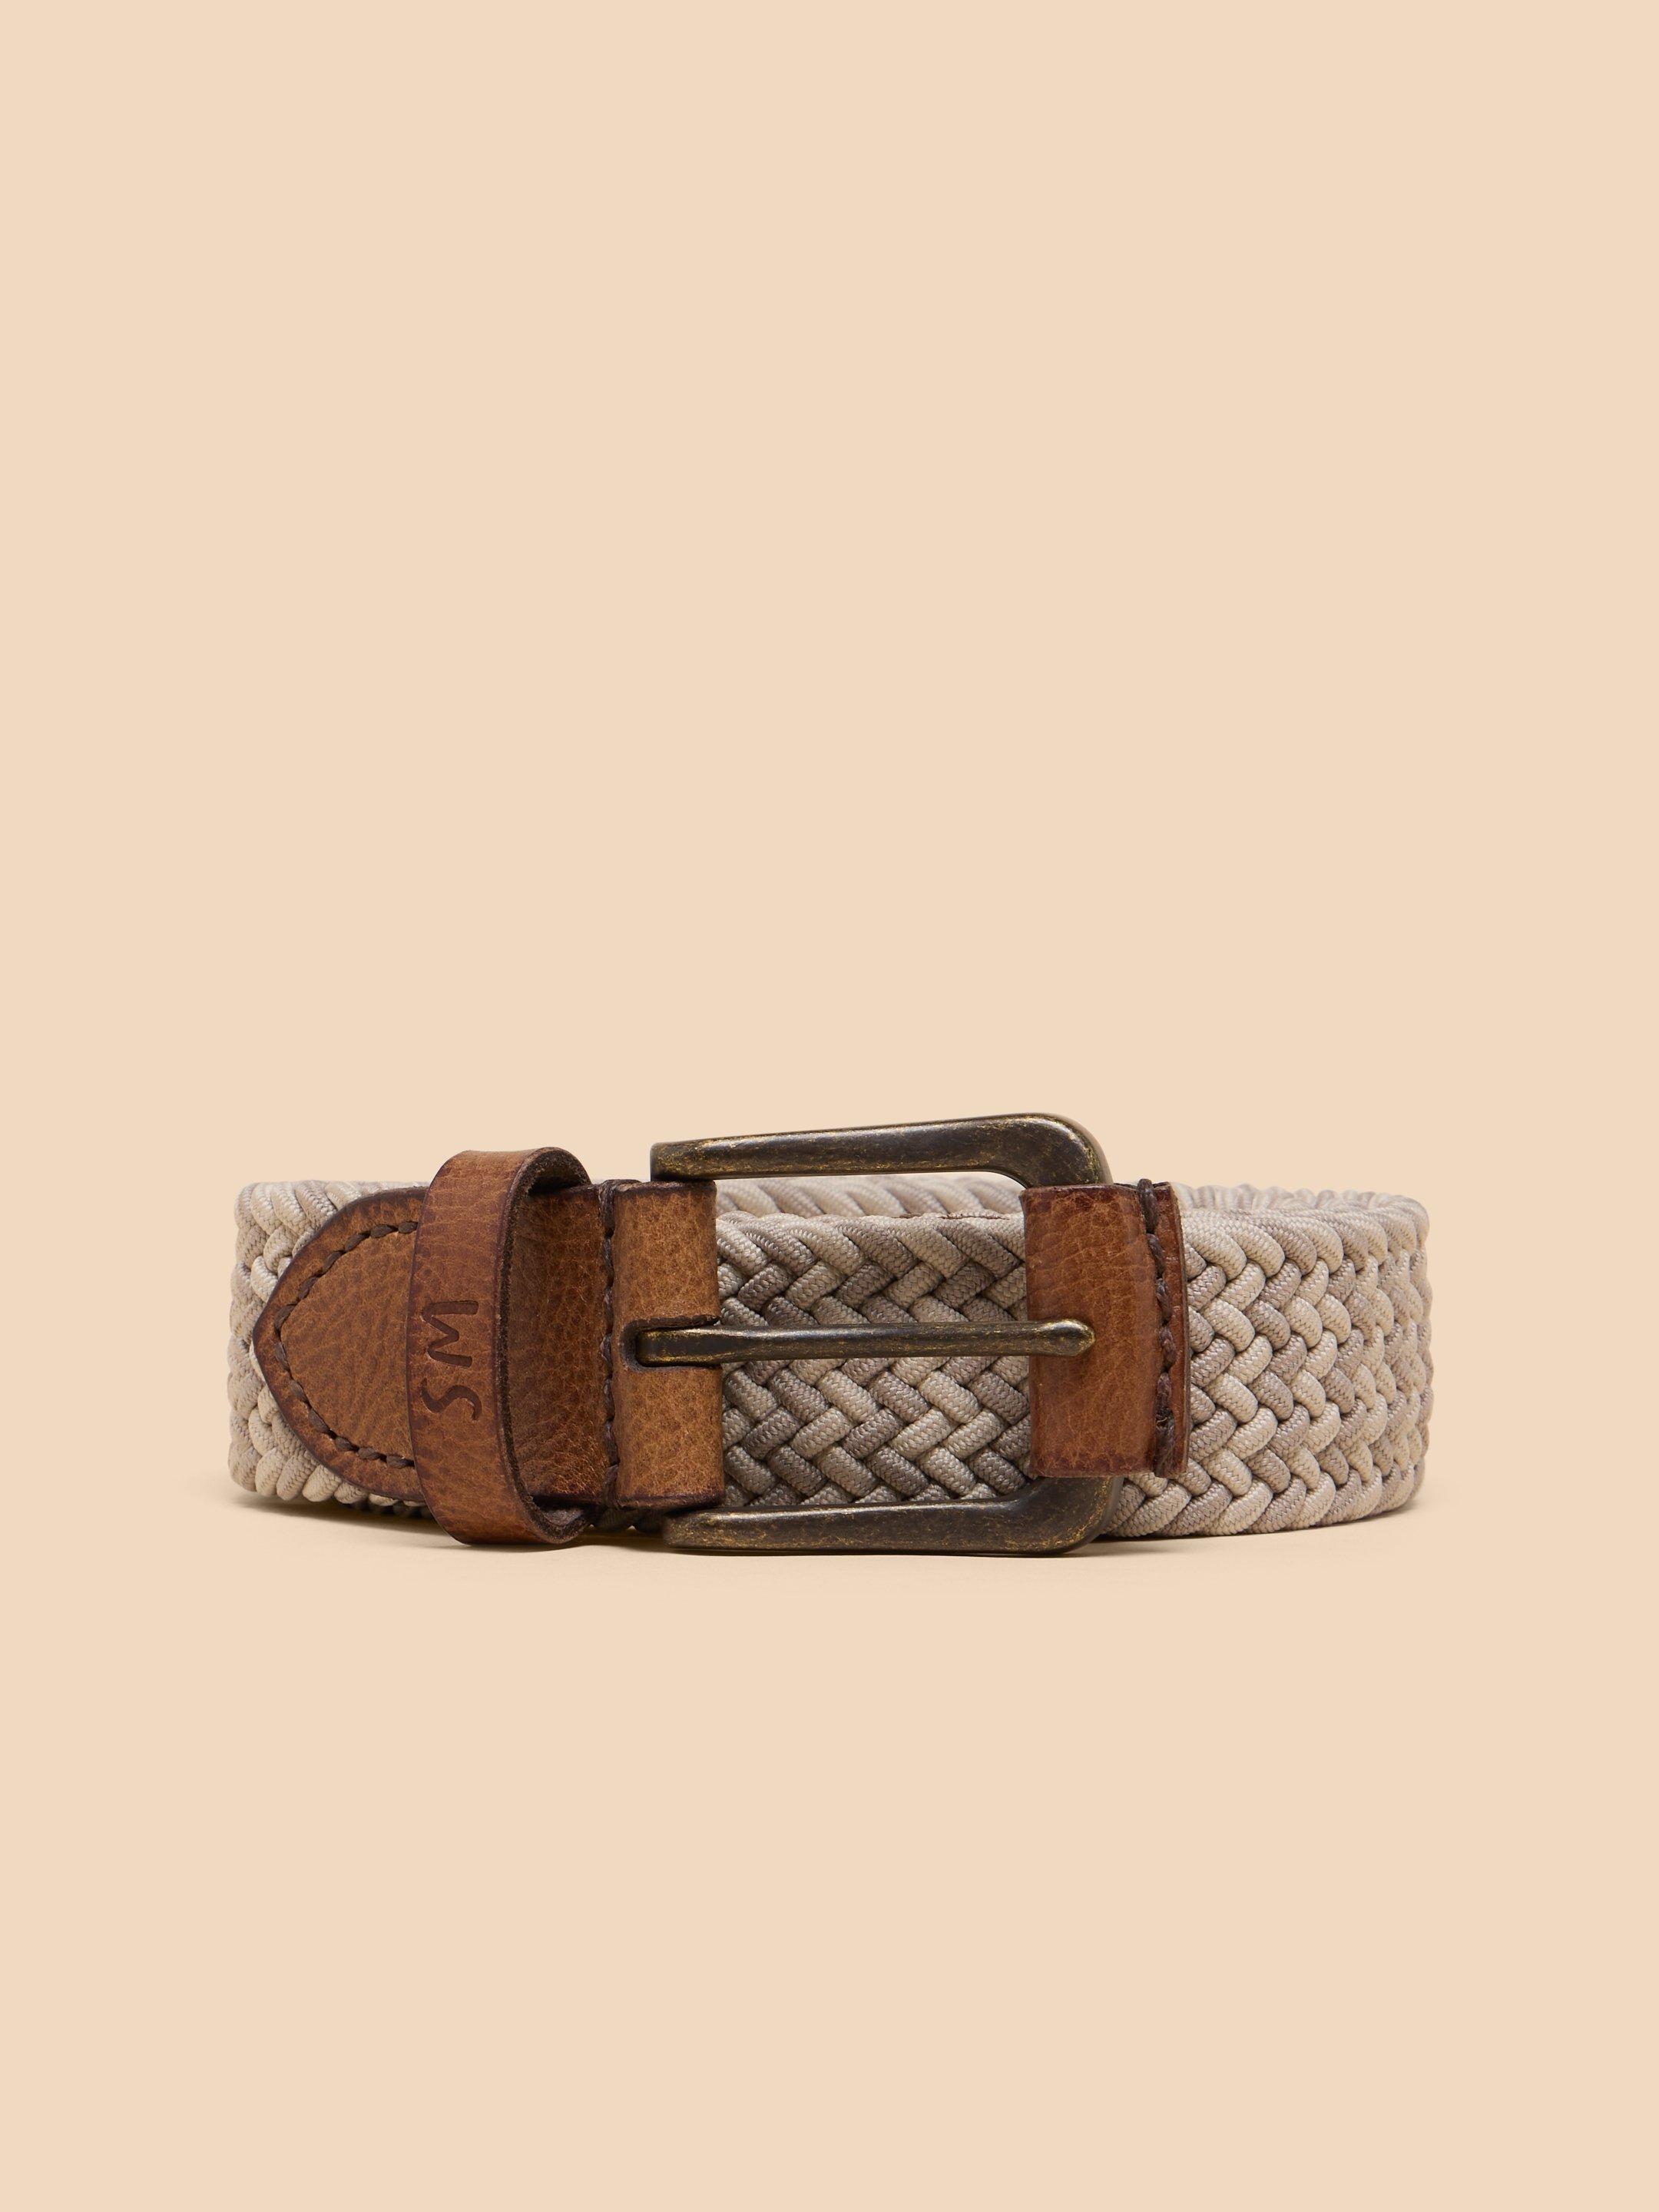 Woven Elasticated Belt in LGT NAT - LIFESTYLE